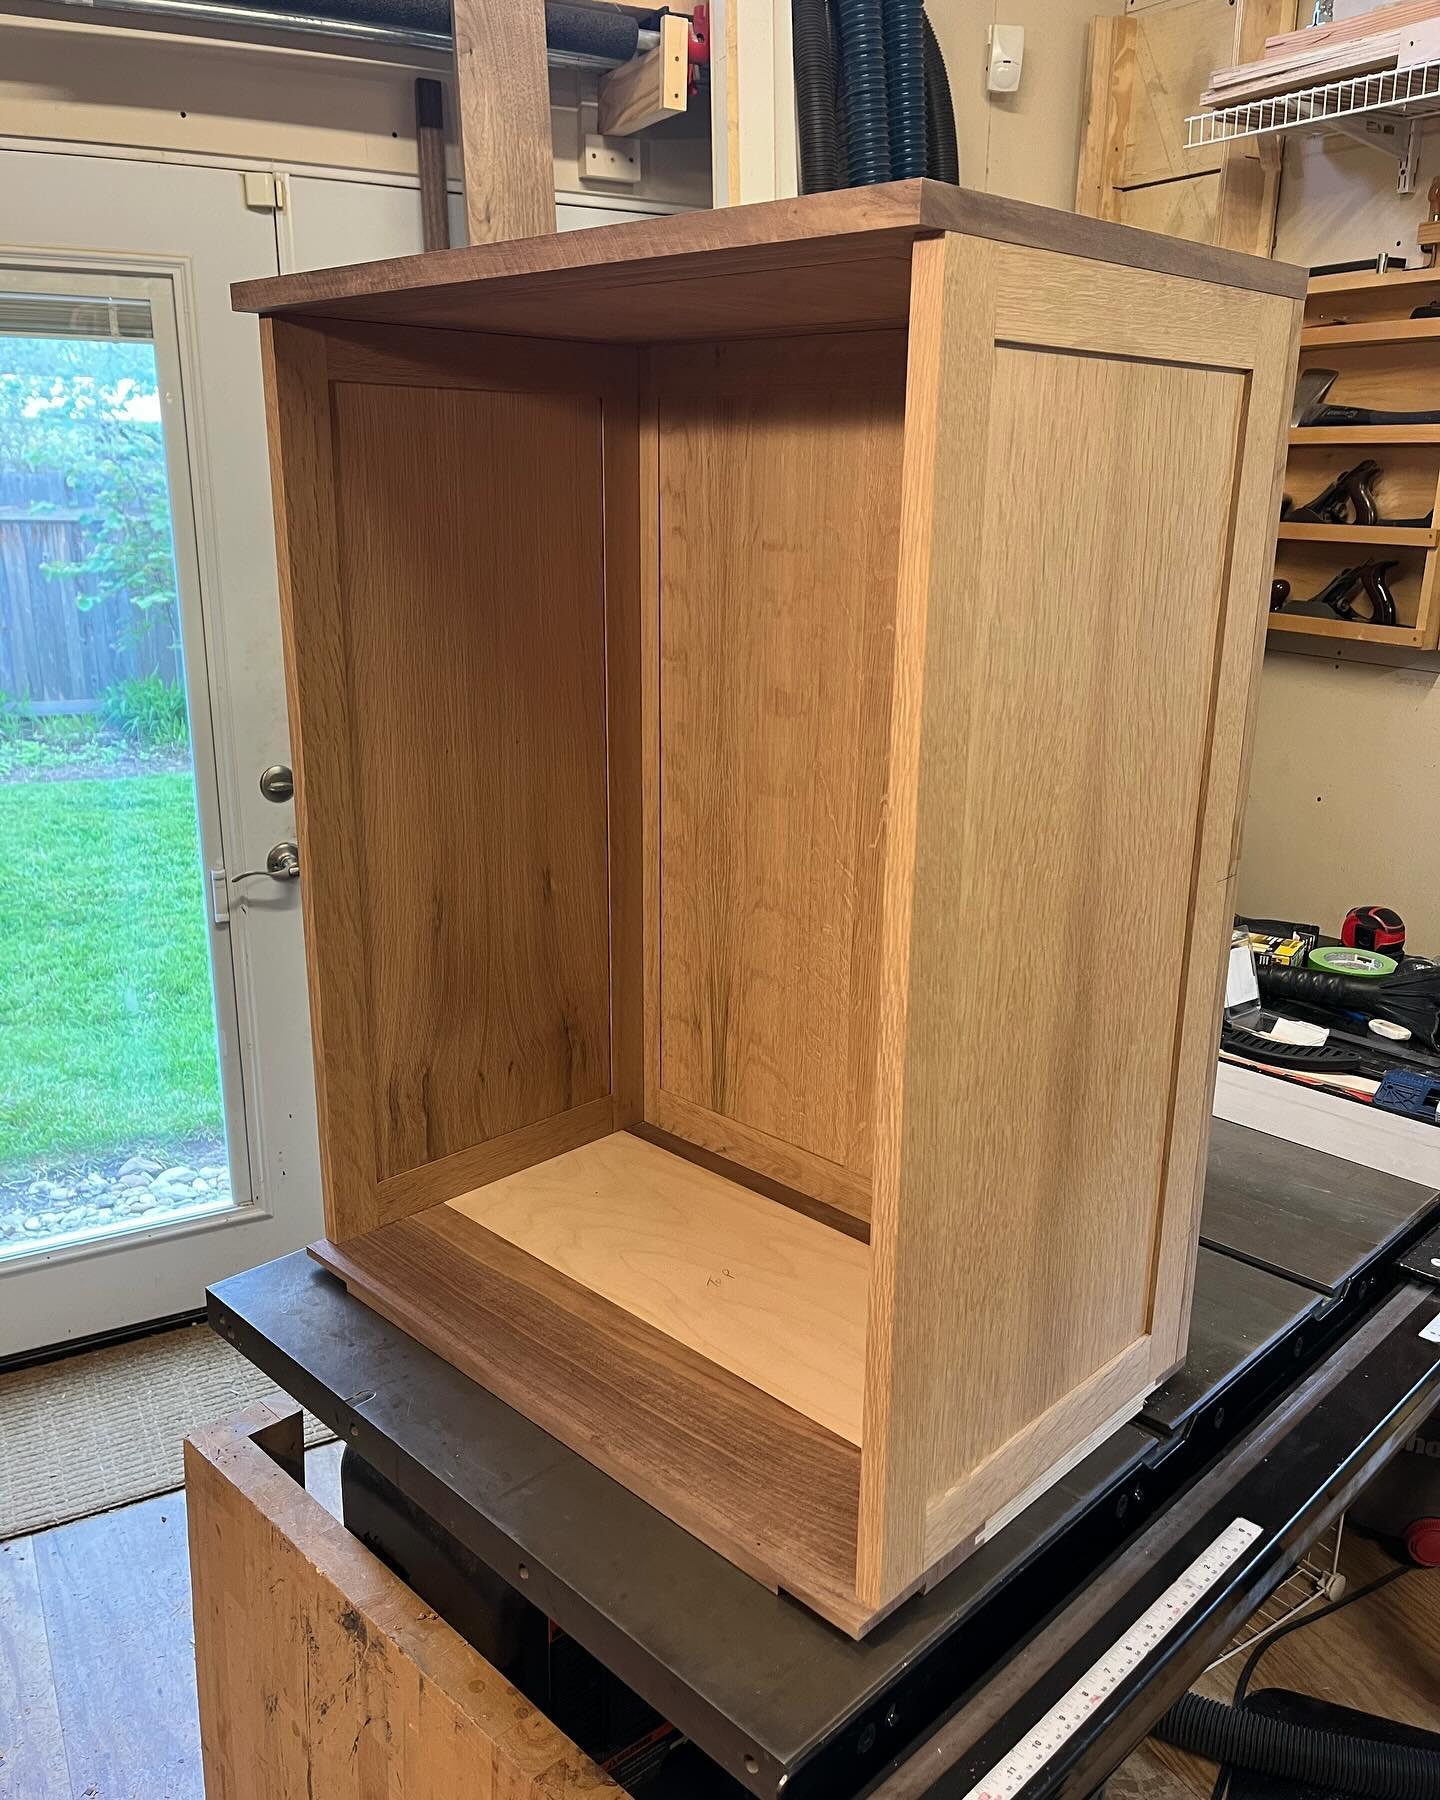 In &ldquo;case&rdquo; you thought there was only going to be a base for this project. Here&rsquo;s the upper! This was another case (no pun intended this time) of me making it harder for myself. Rift-sawn book-matched white oak panels (shopsawn venee